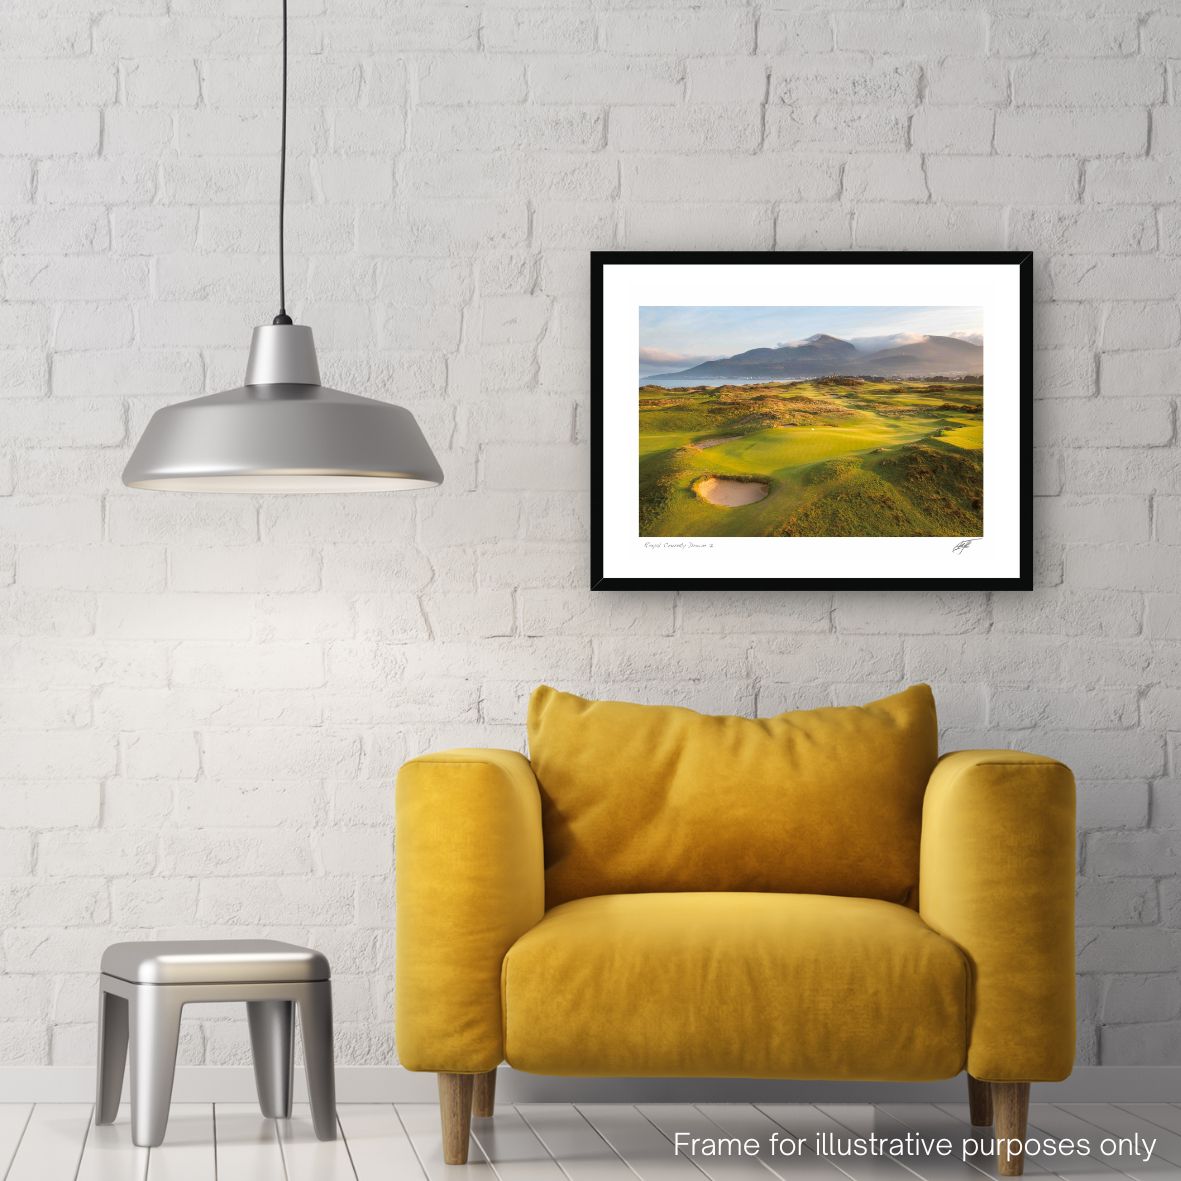 ROYAL COUNTY DOWN HOLE 7 PHOTOGRAPHY PRINT BY ADAM TOTH IN BLACK FRAME